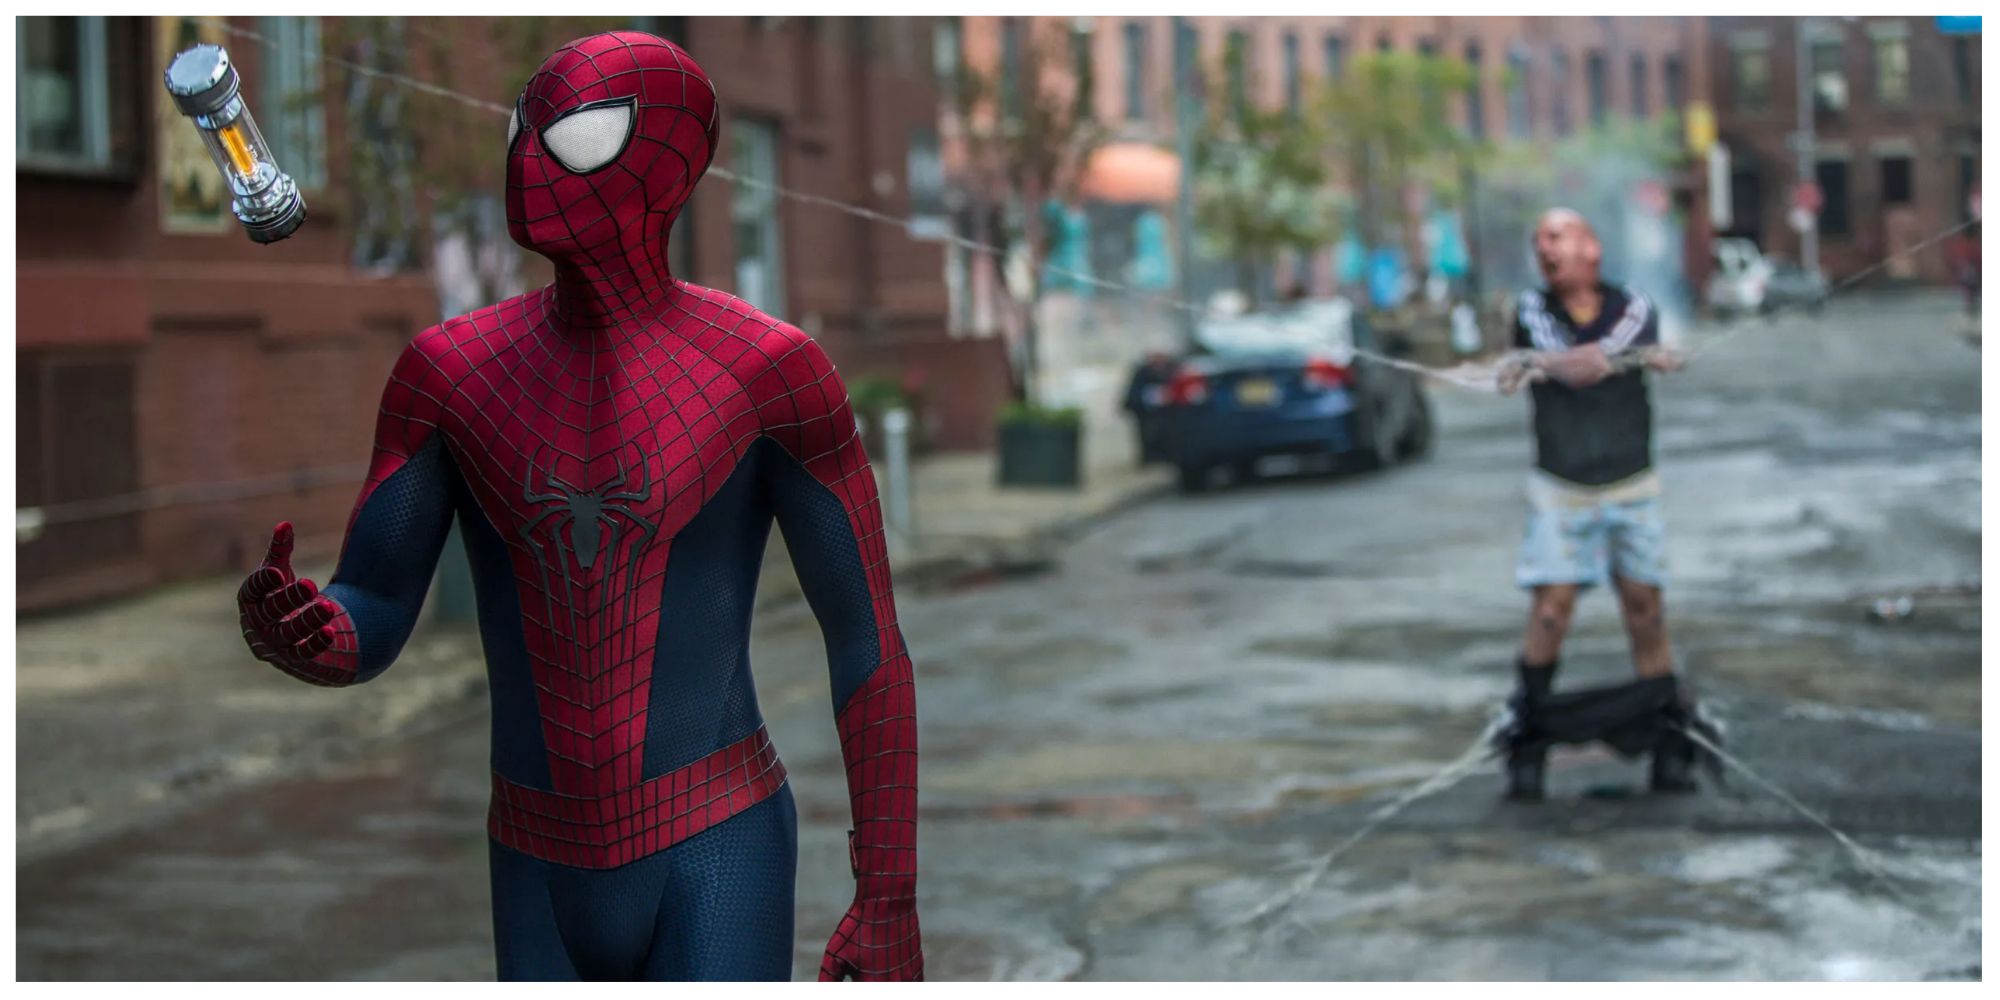 Spider-Man and Rhino in The Amazing Spider-Man 2